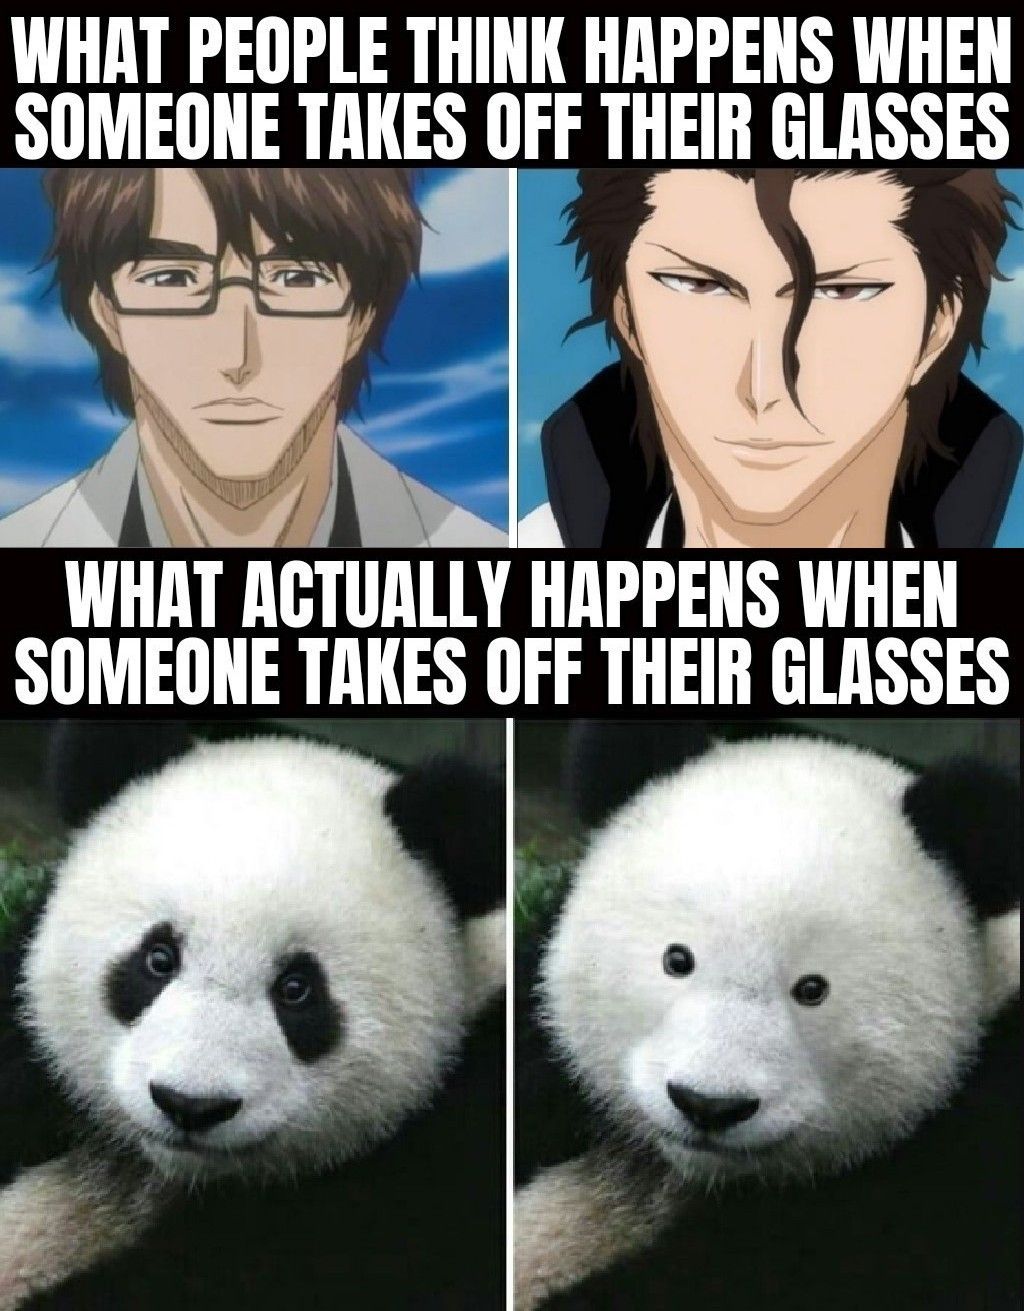 Glasses users understand